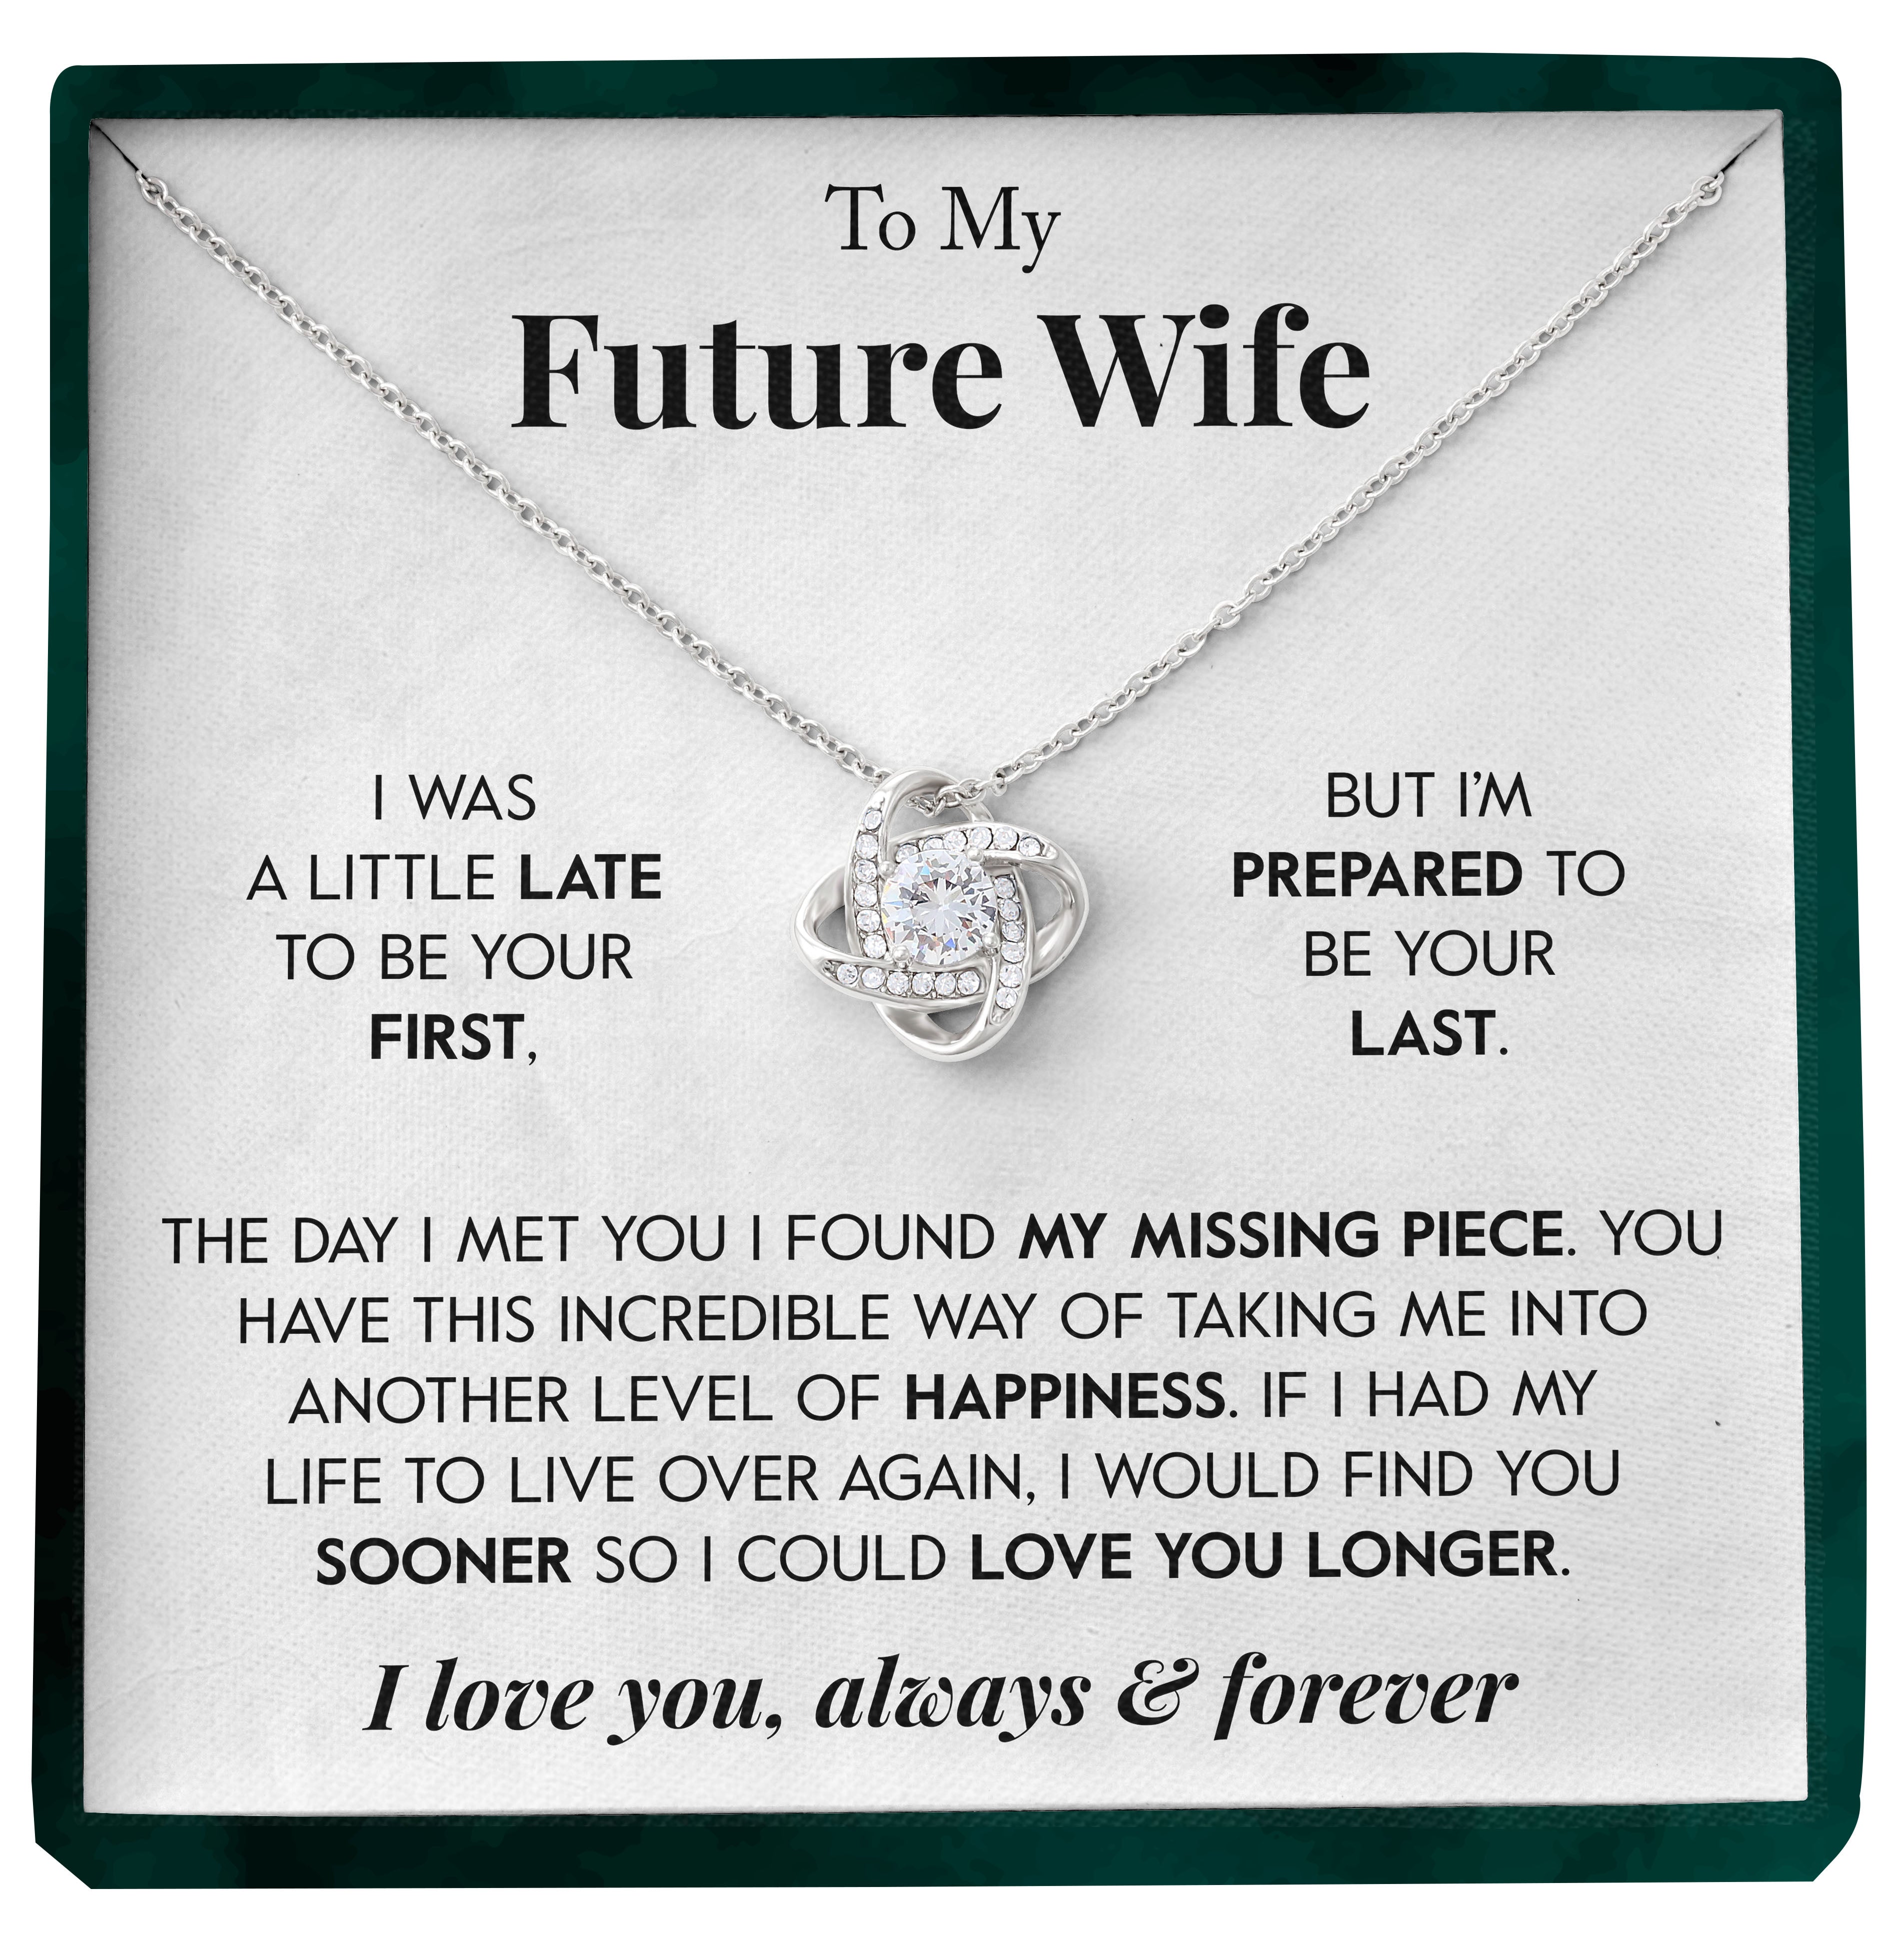 To My Future Wife | "My Missing Piece" | Love Knot Necklace